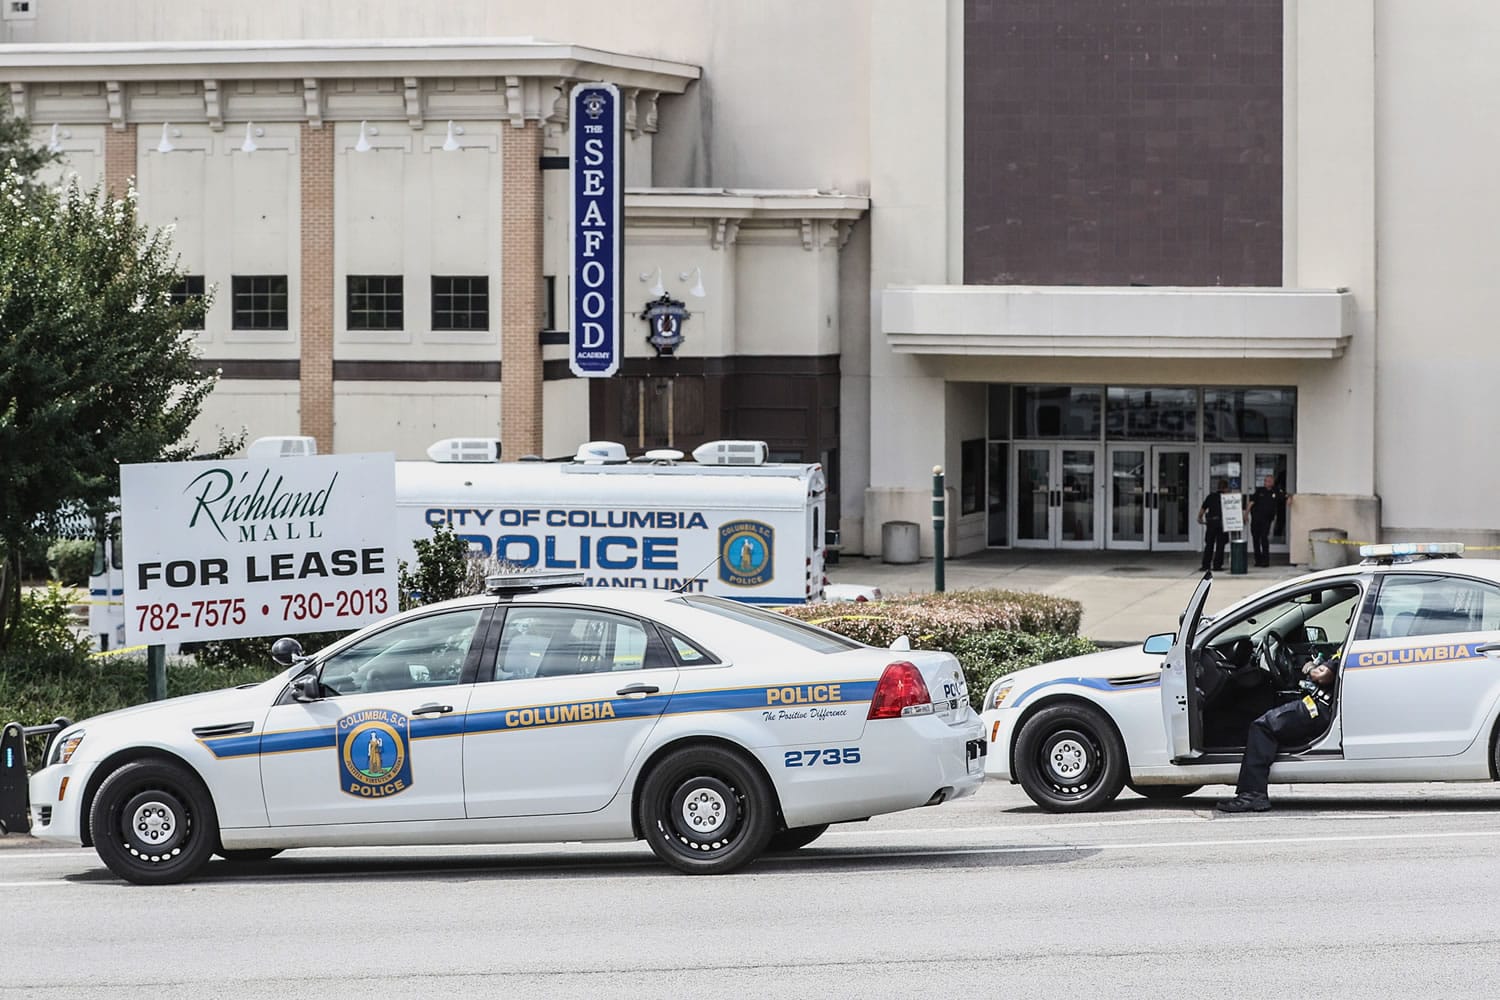 Columbia Police Officers investigate the scene where a Forest Acres Police Officer was fatally shot in the Richland Mall on Wednesday in Forest Acres, S.C. Police say a suspect is in custody.